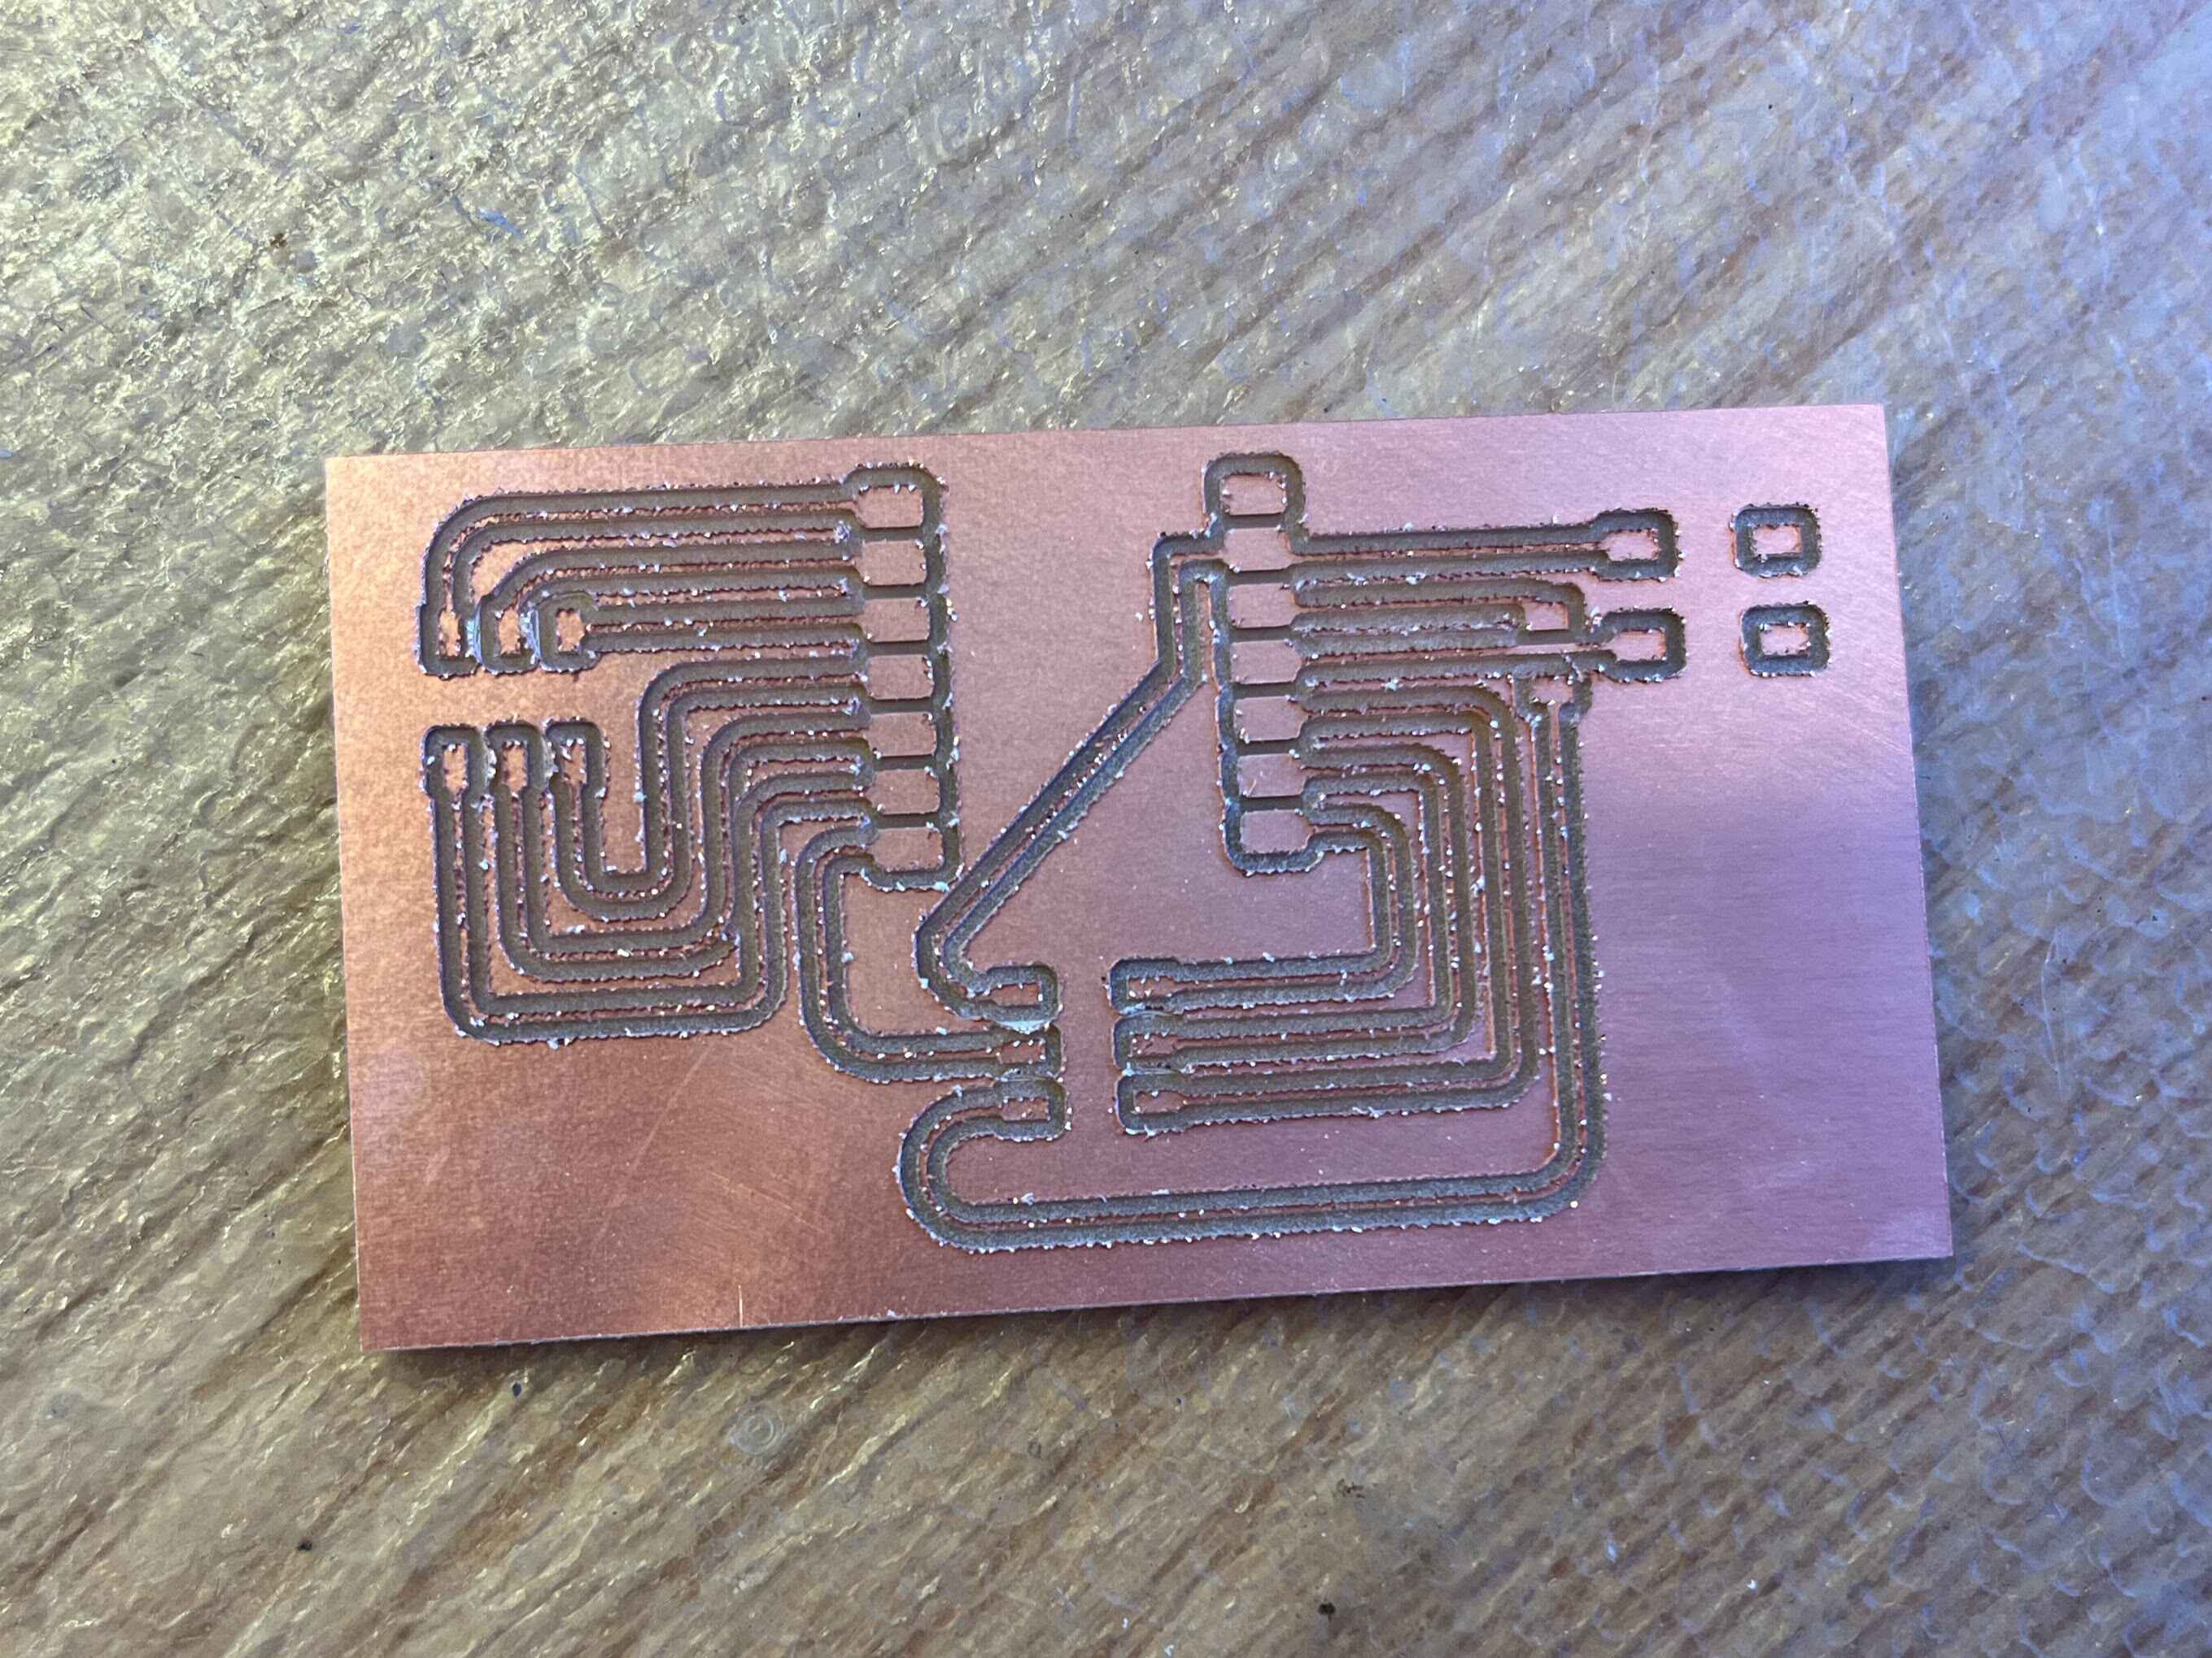 PCB fresh off the mill